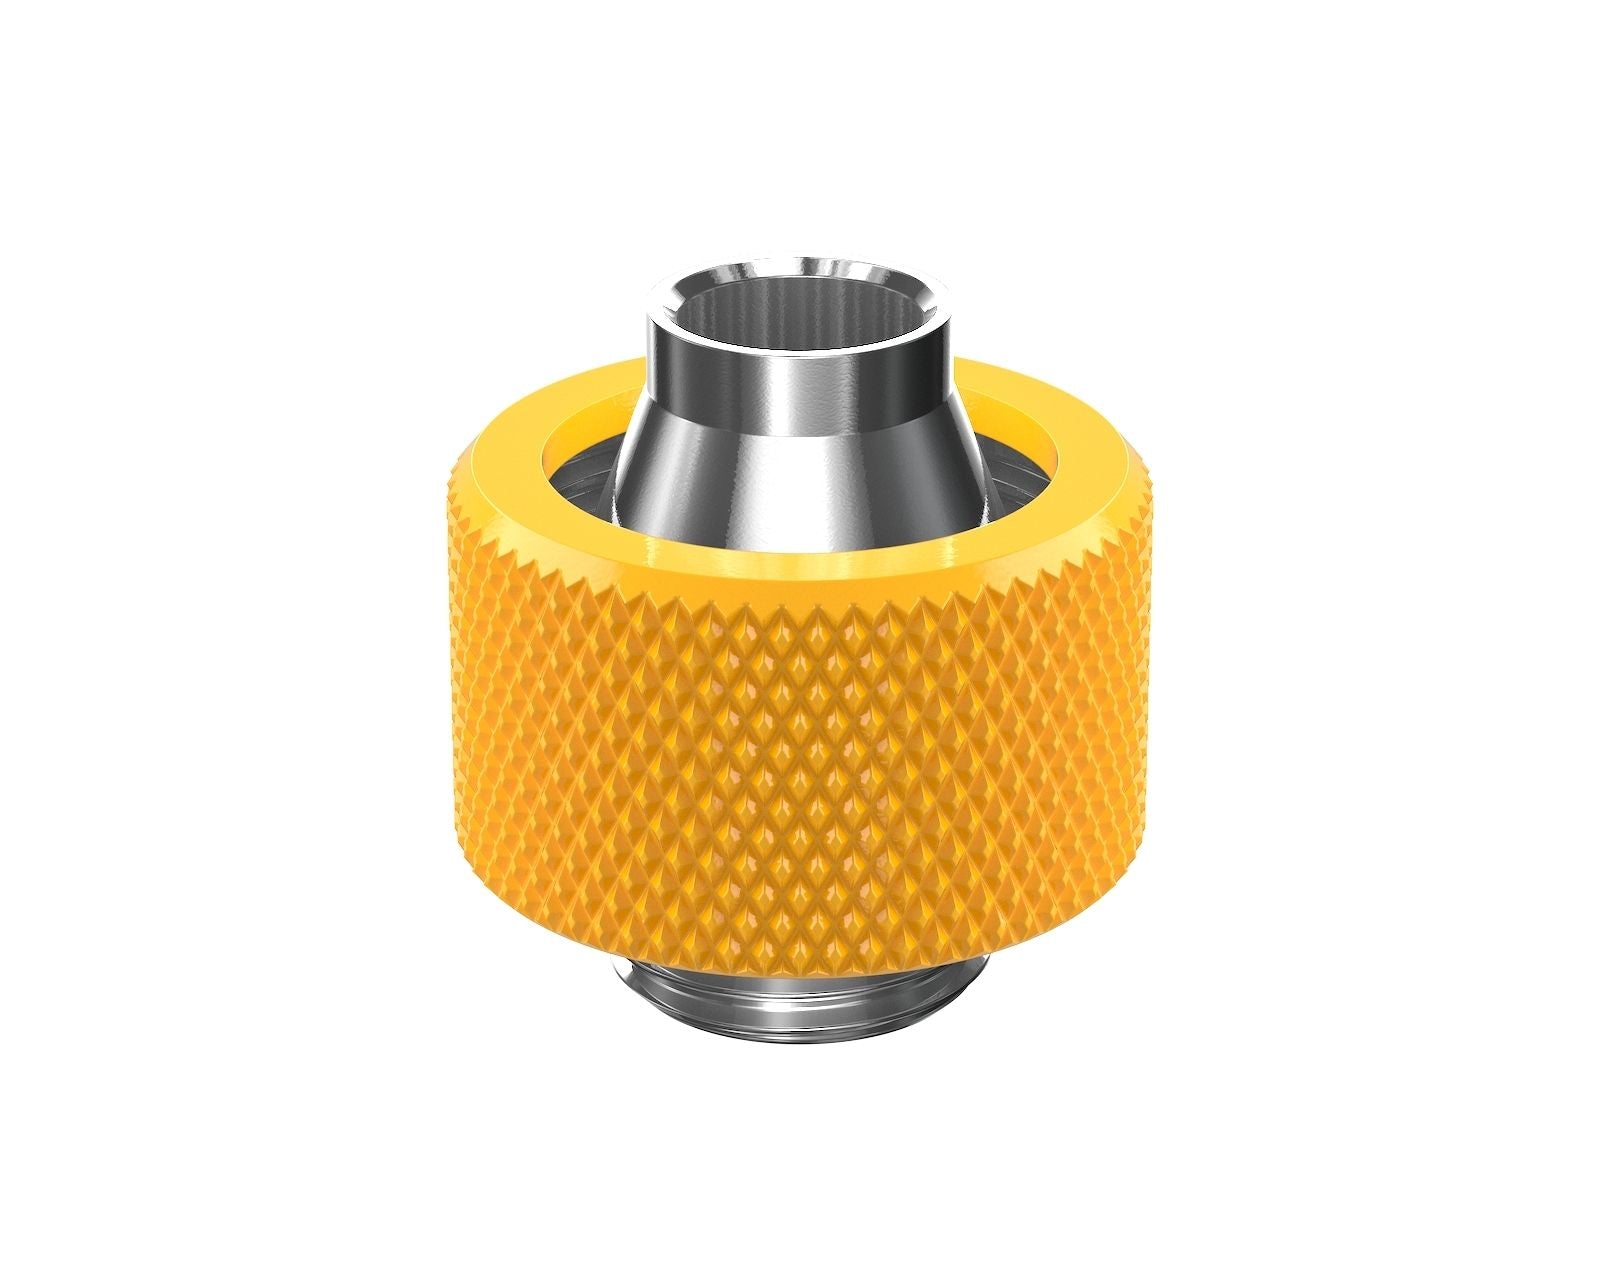 PrimoChill SecureFit SX - Premium Compression Fitting For 3/8in ID x 5/8in OD Flexible Tubing (F-SFSX58) - Available in 20+ Colors, Custom Watercooling Loop Ready - Yellow